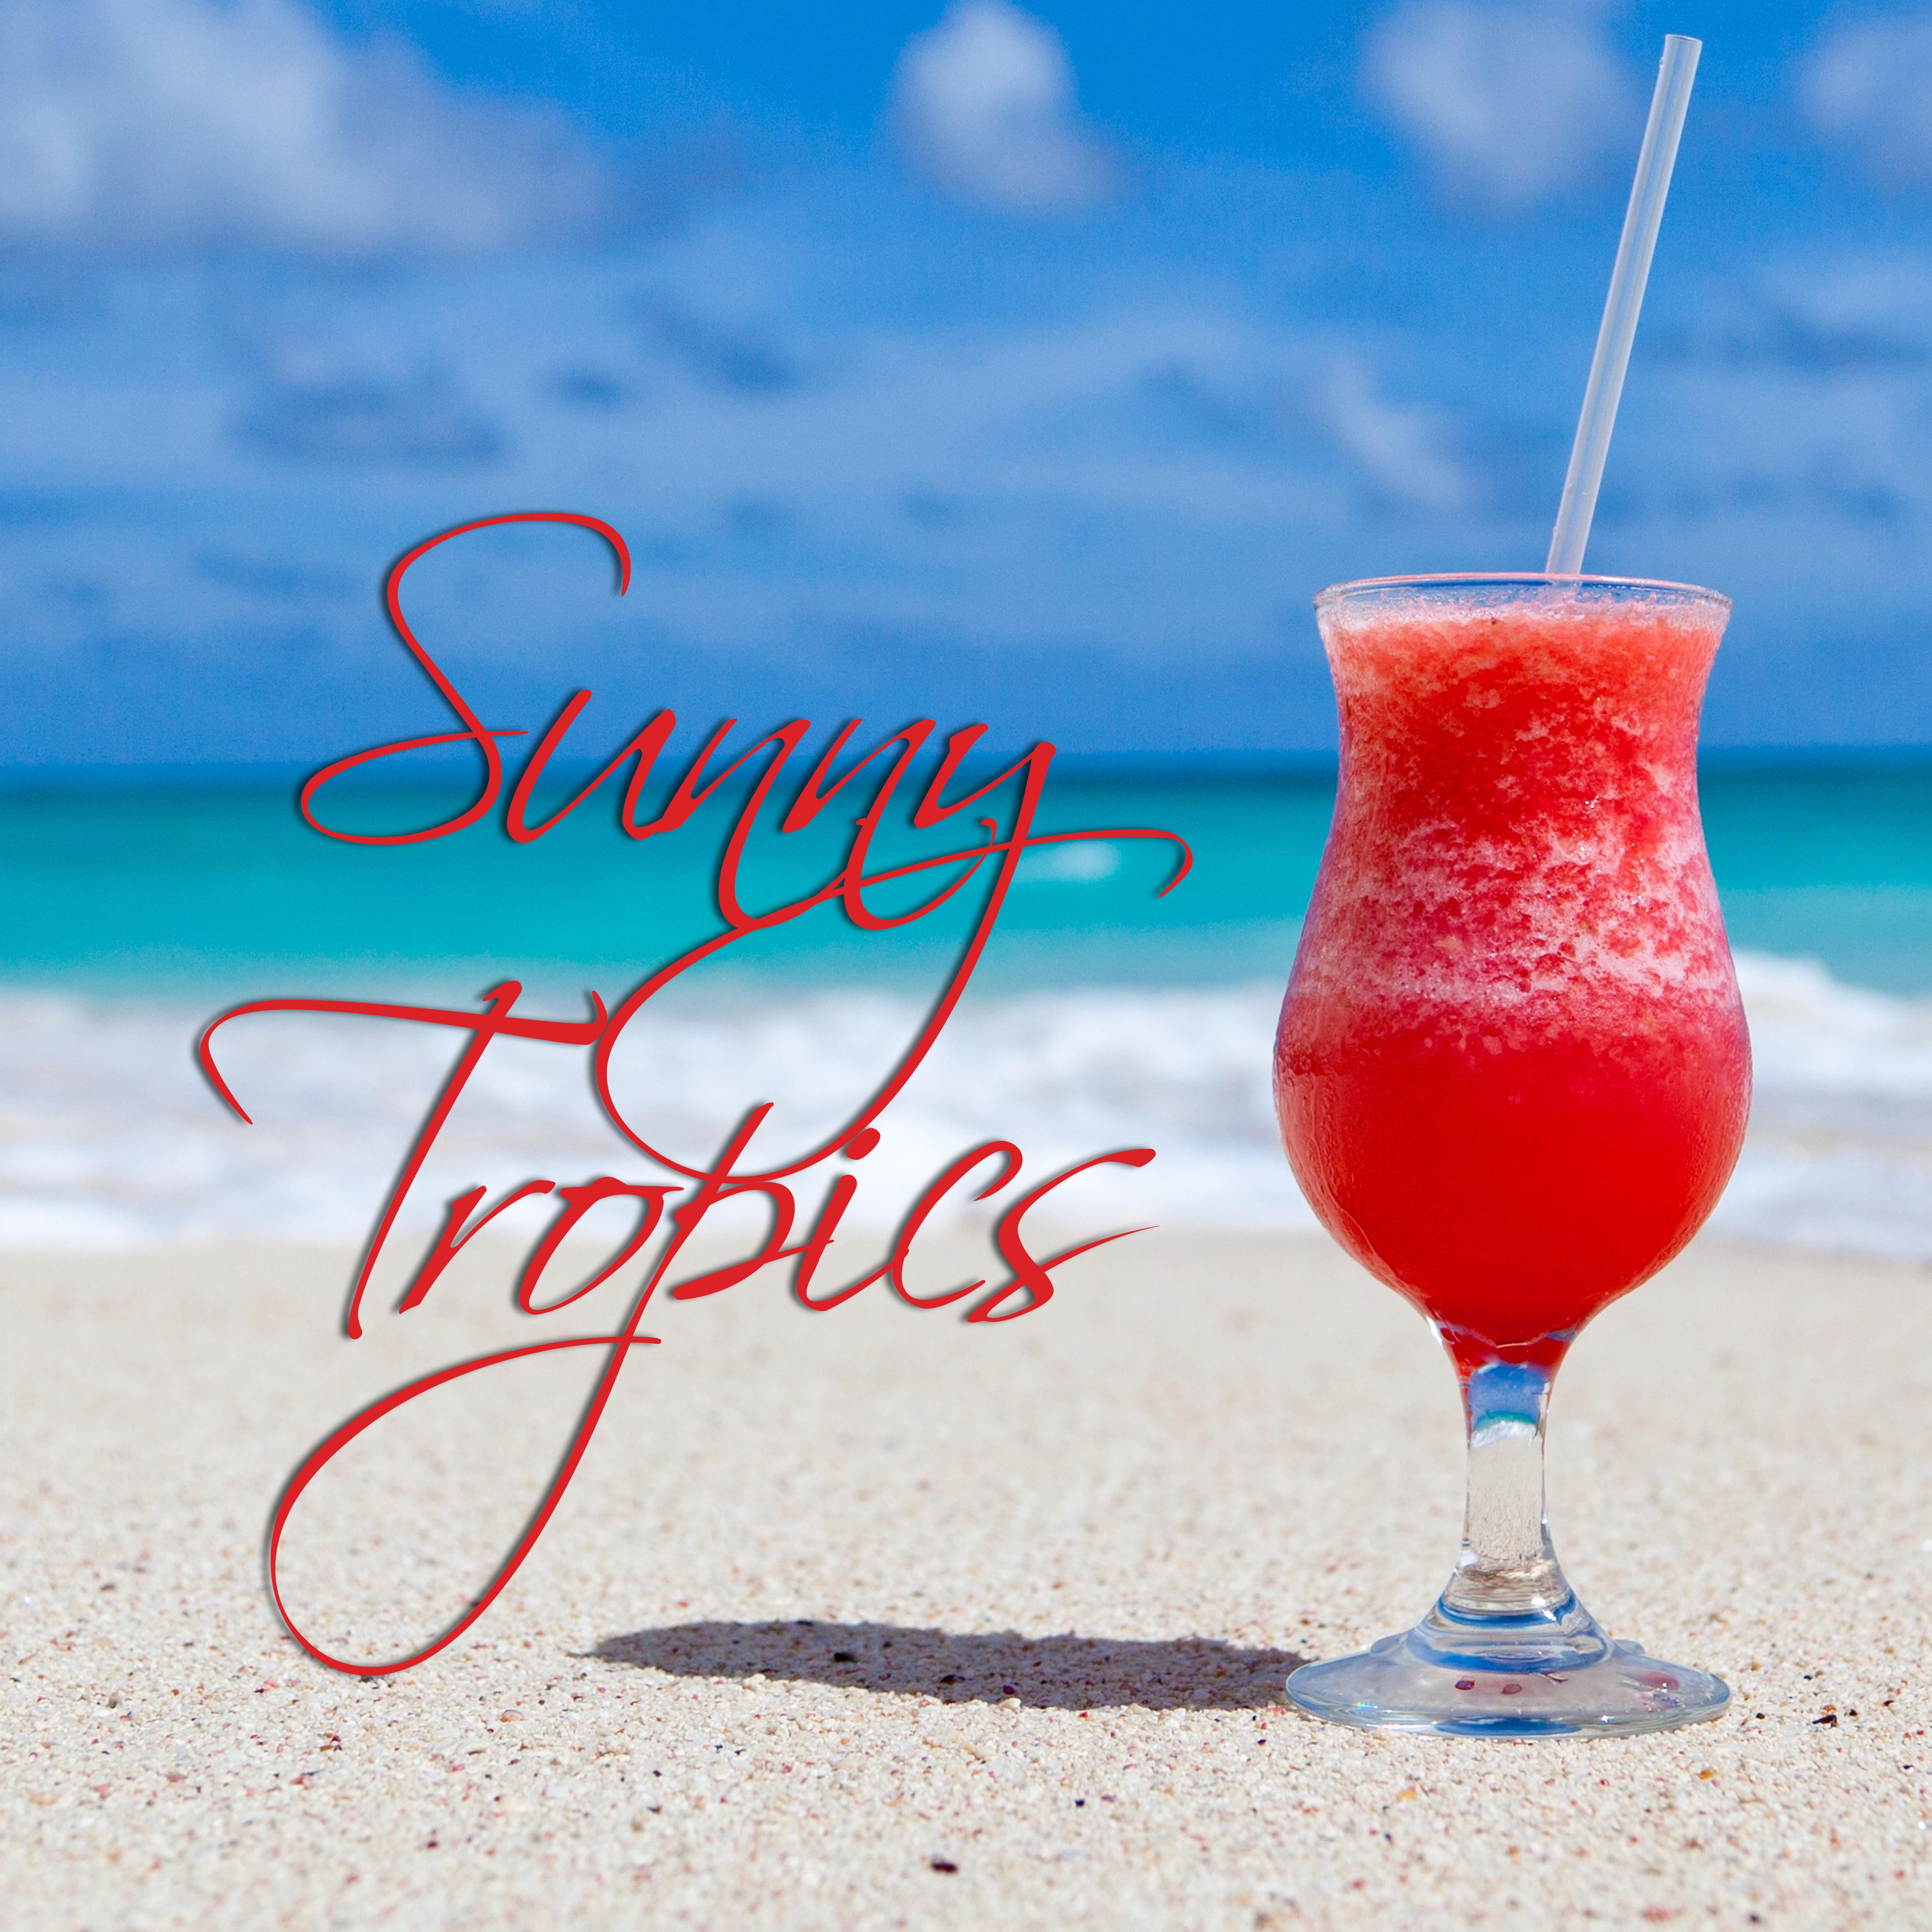 Sunny Tropics – Holiday Chill Out Music, Island Lounge, Beach Chill, Drink Bar, Summertime, Pure Relaxation, Tropical Chill, Hot Beach